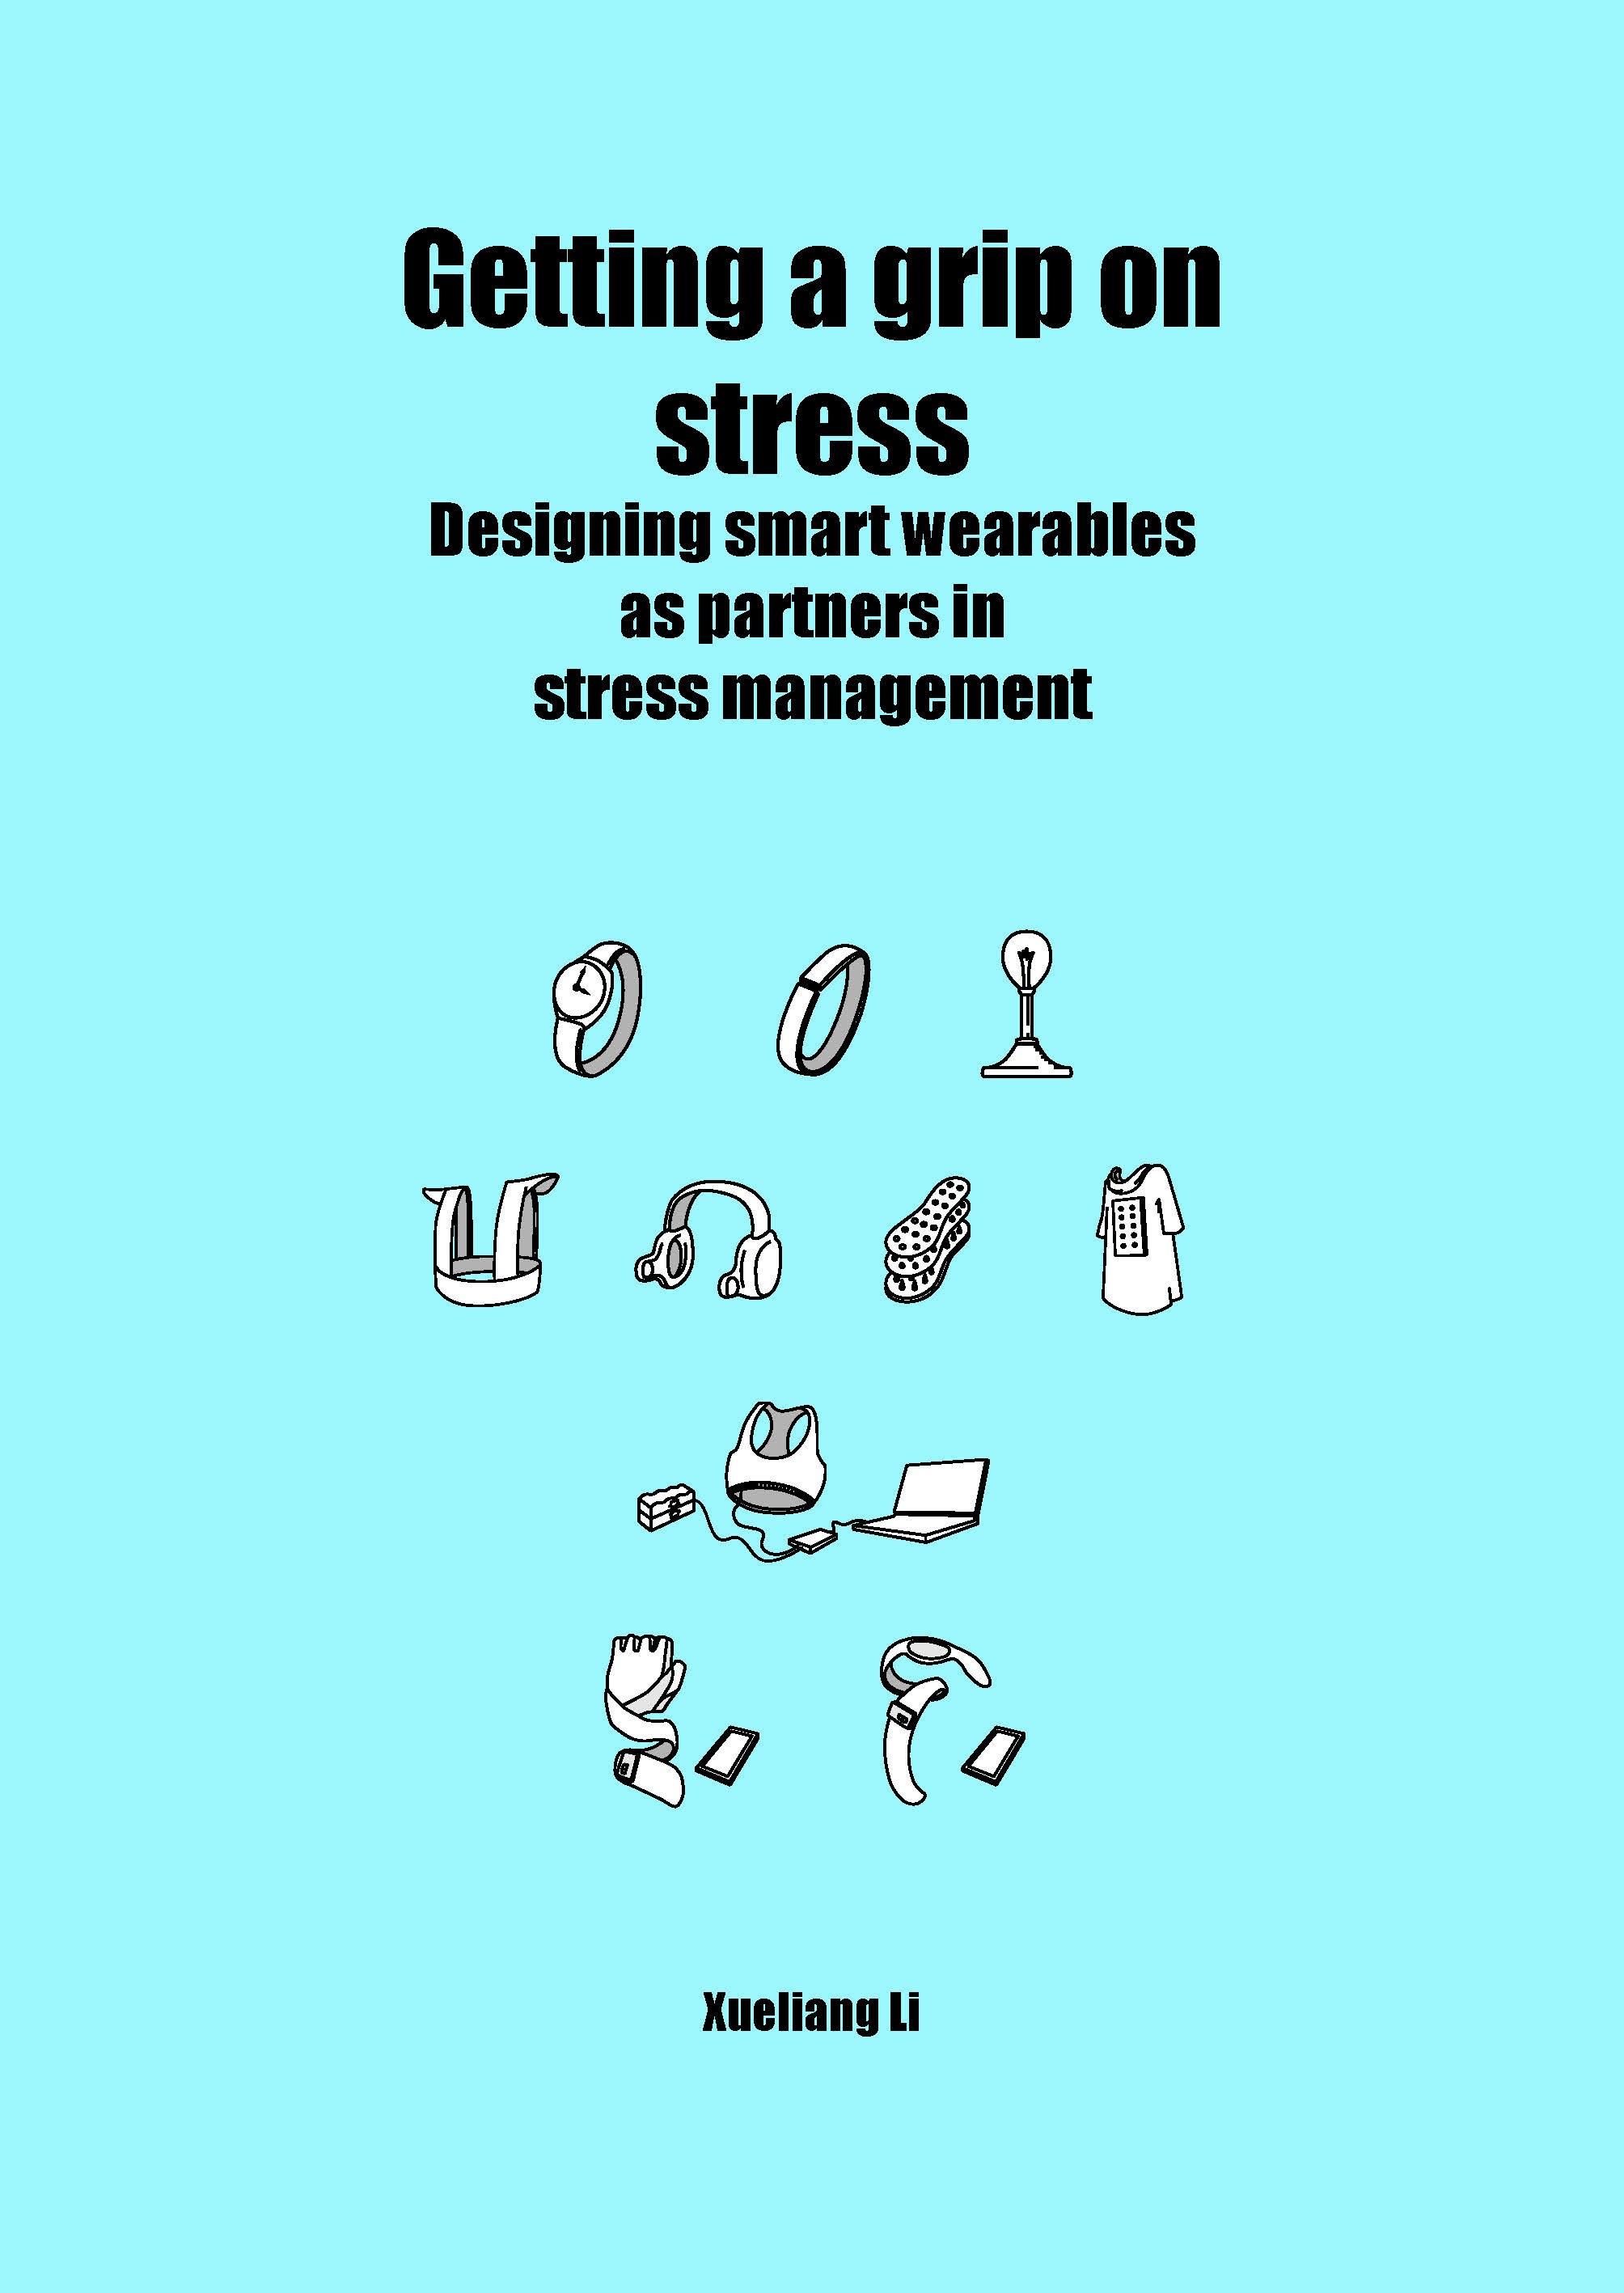 Front cover of Xueliang's thesis, bright coloured with the title 'Getting a grip on stress: Designing smart wearables as partners in stress management' on it.